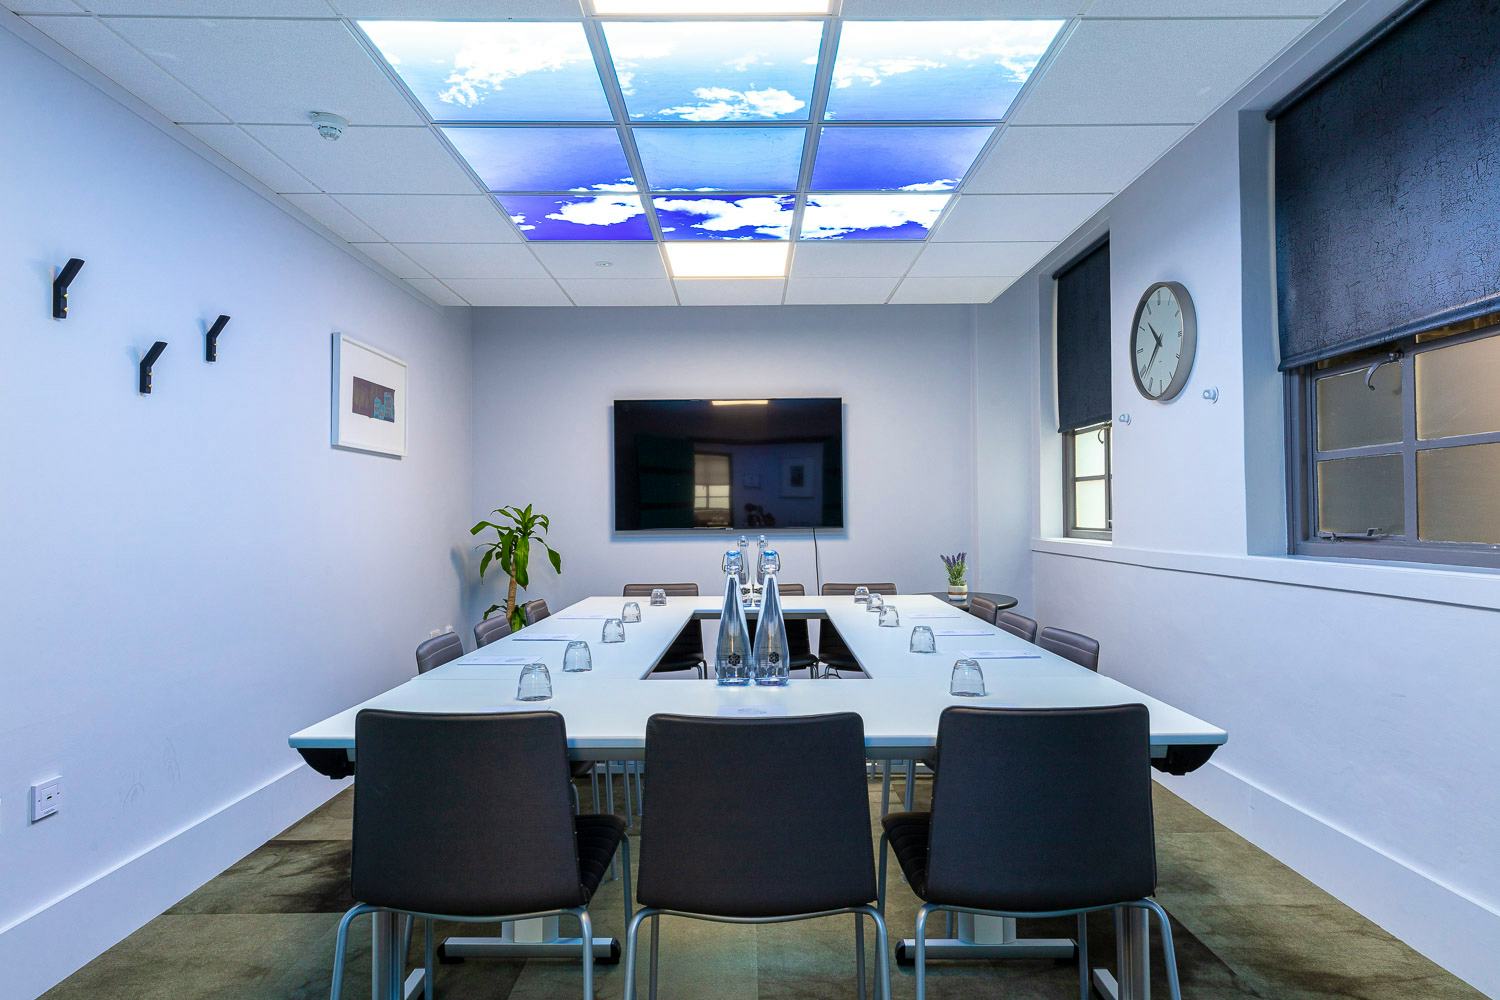 Inspiring Picture of Cool Conference Room Ideas : Inspiring Conference Room  With Grey Rec… | Conference room design, Meeting room design, Meeting room  design office